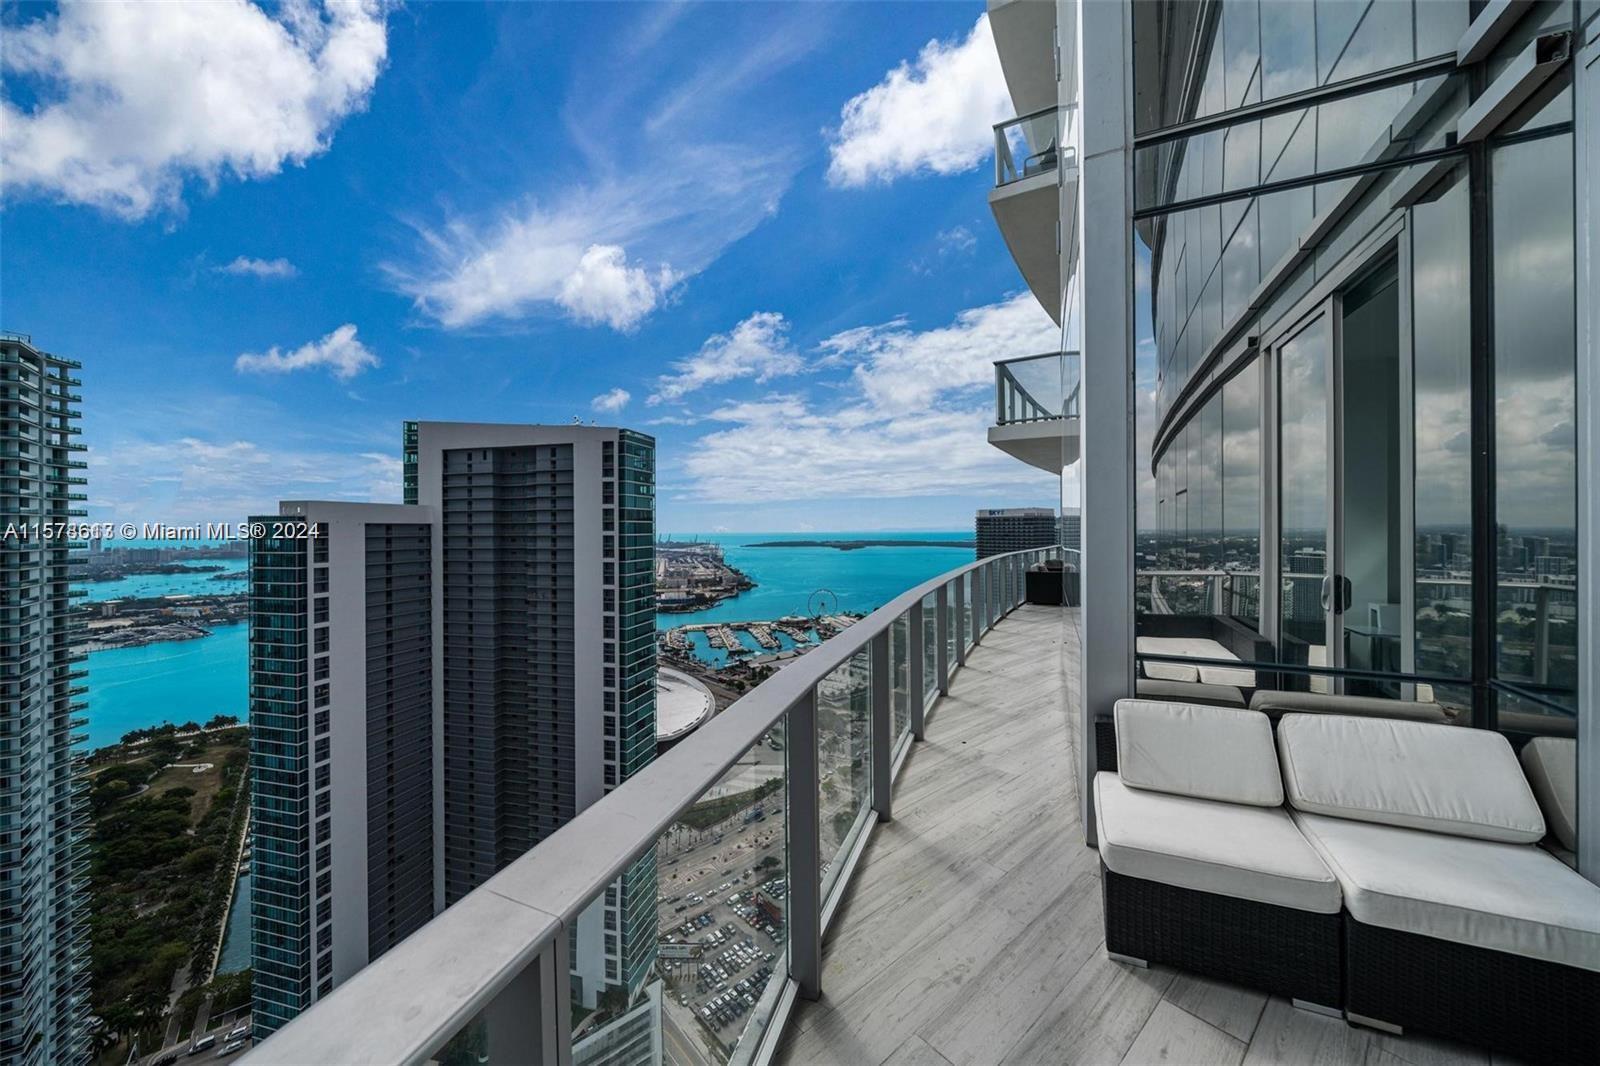 Welcome to the absolute most stunning 2bed/3bath + den with direct water view on one of the highest floors with rare huge wrap around terrace at Paramount Miami. Features include: private elevator, direct water view, huge terrace, floor to ceiling windows, 10 ft high ceilings, white tile floors, marble backsplash, gourmet kitchen w/Bosch and Sub Zero appliances, split floor plan, huge master bathroom w/sunken tub & shower, large walk in closet, spacious den that also could be converted into a very nice offers or storage, washer/dryer area, spacious second bedroom with private bathroom. This is one of the highest floor 03 lines with direct water view and rare wrap around terrace. Have access to world class amenities: basketball, tennis, 5 pools, boxing, spa, gym, shopping and more.